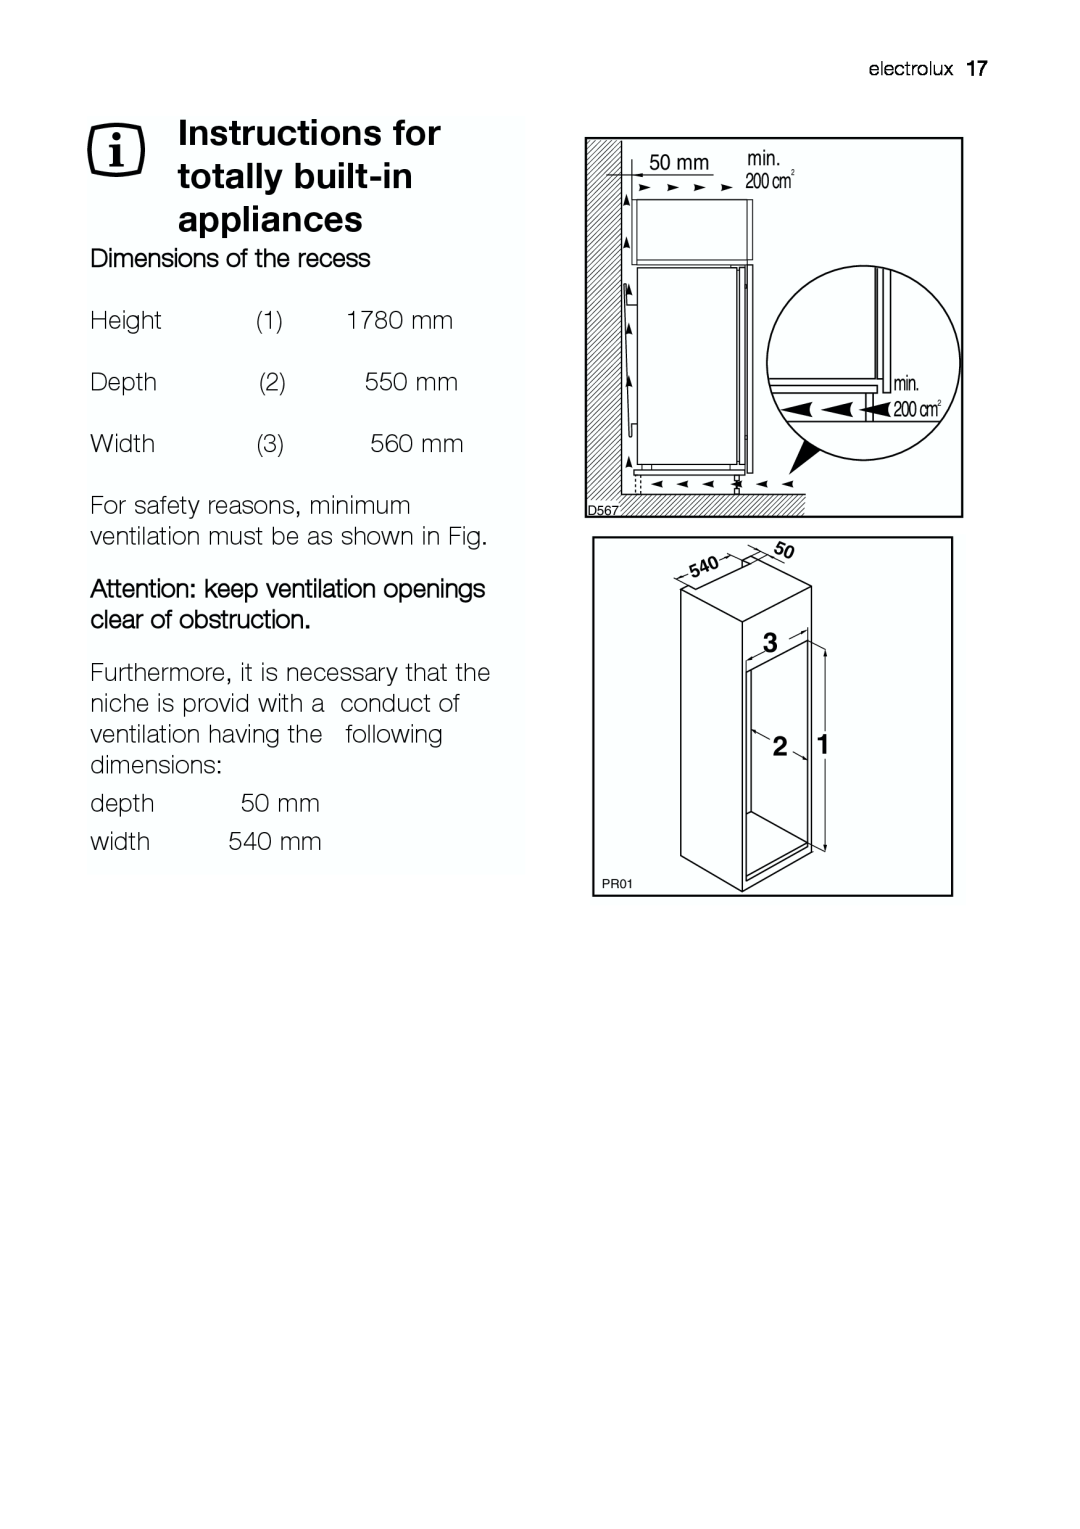 Electrolux EUG 23800 manual Instructions for totally built-in appliances, Dimensions of the recess 